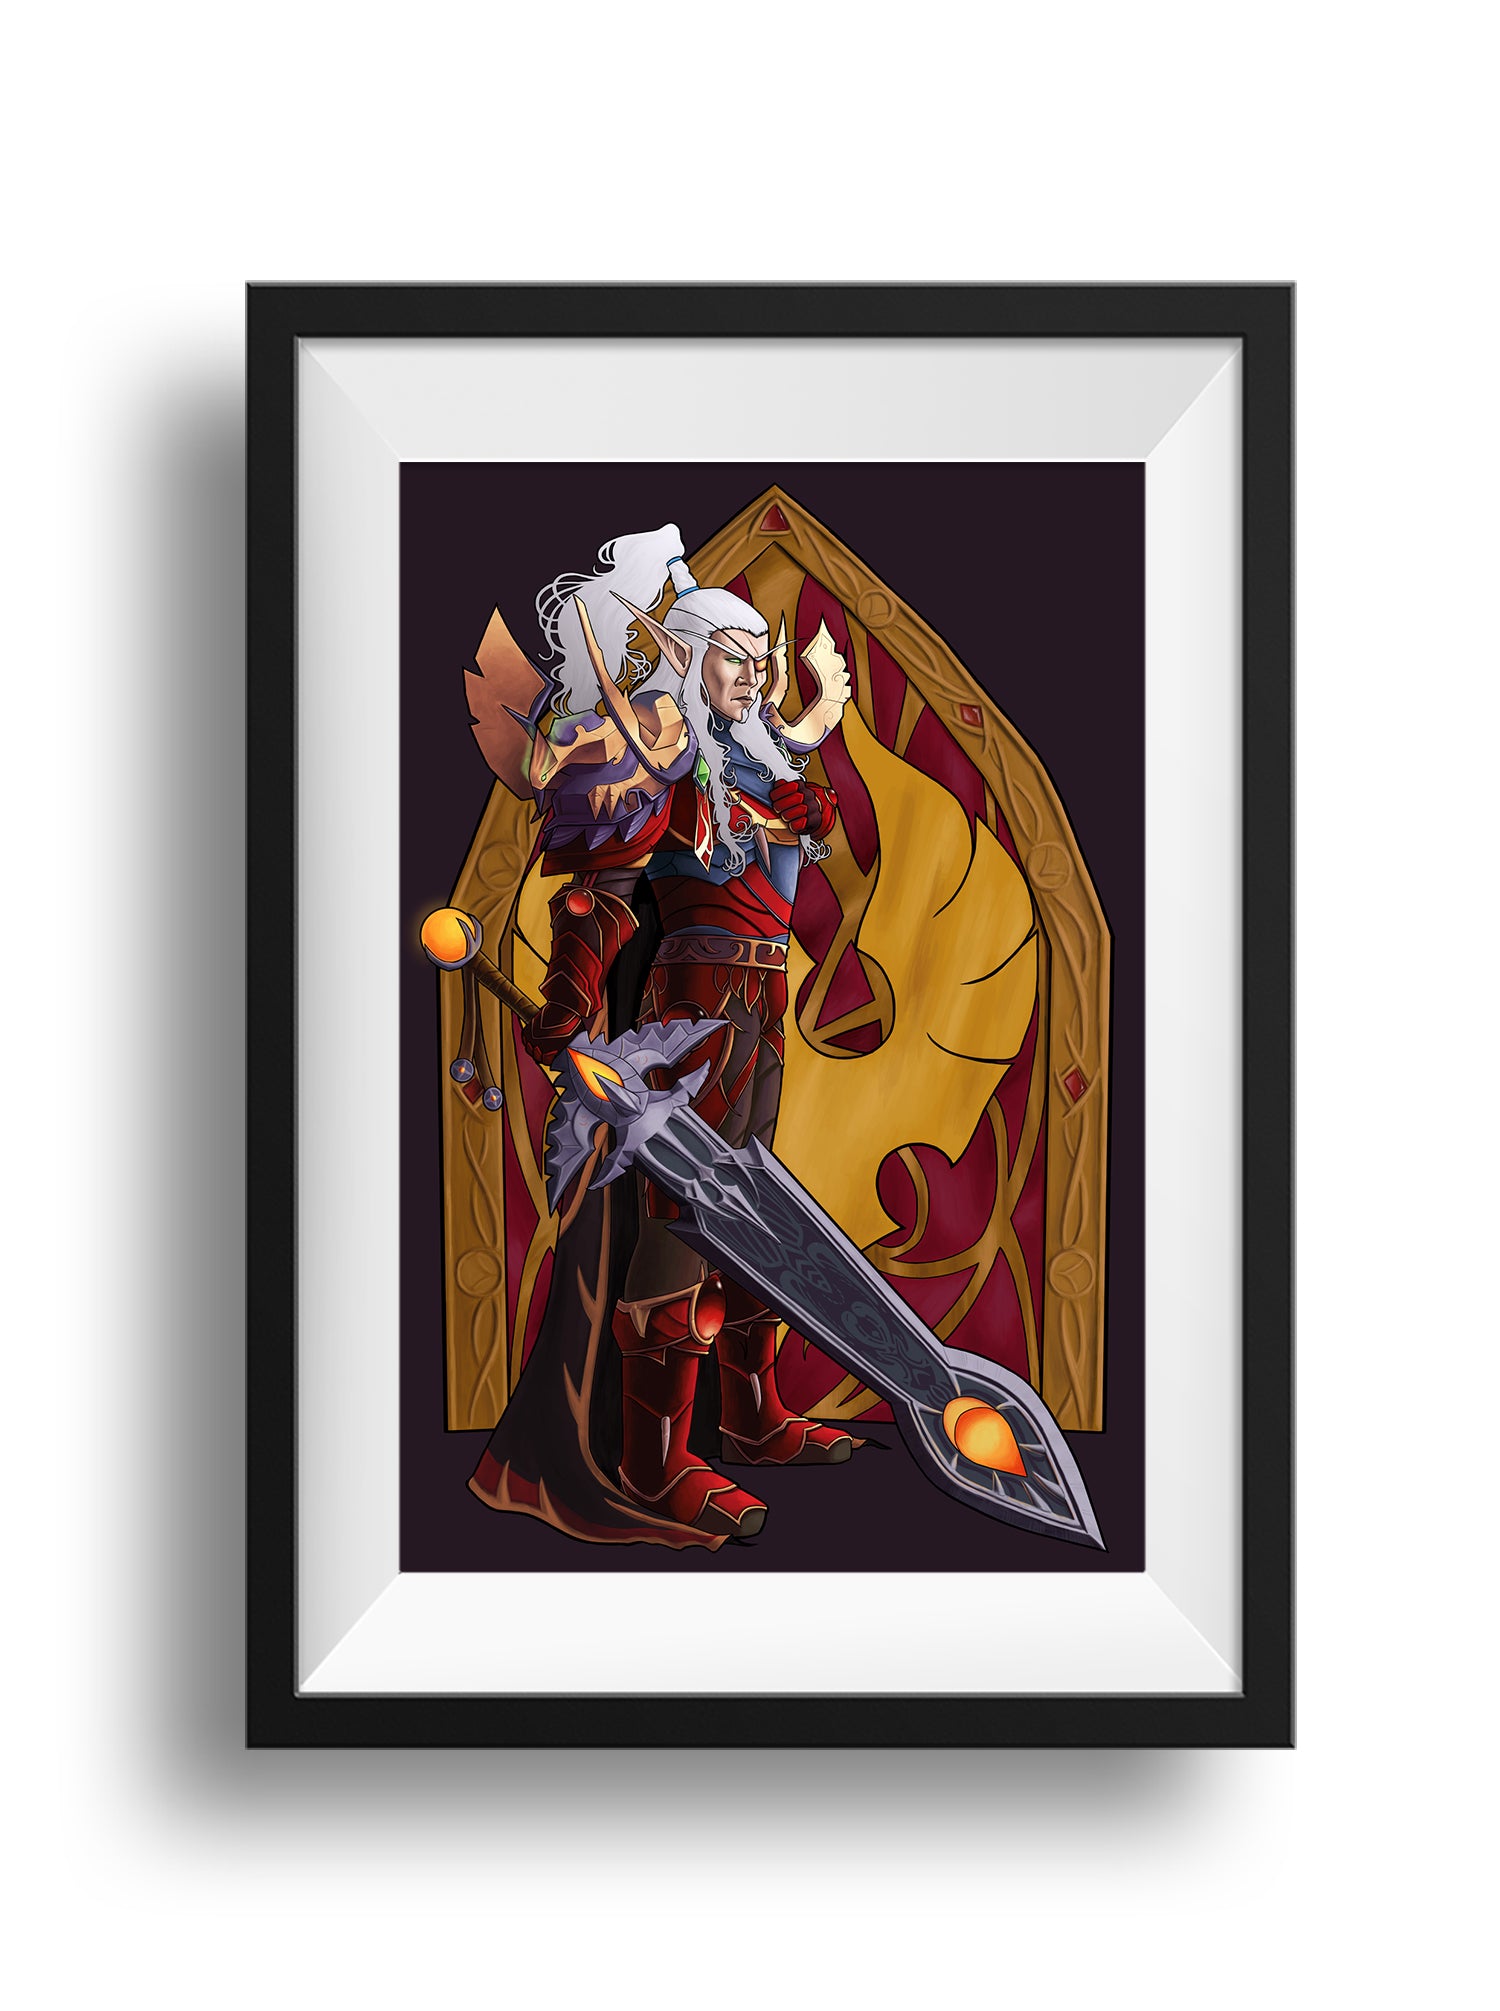 World of Warcraft - For the Good of My People - Print